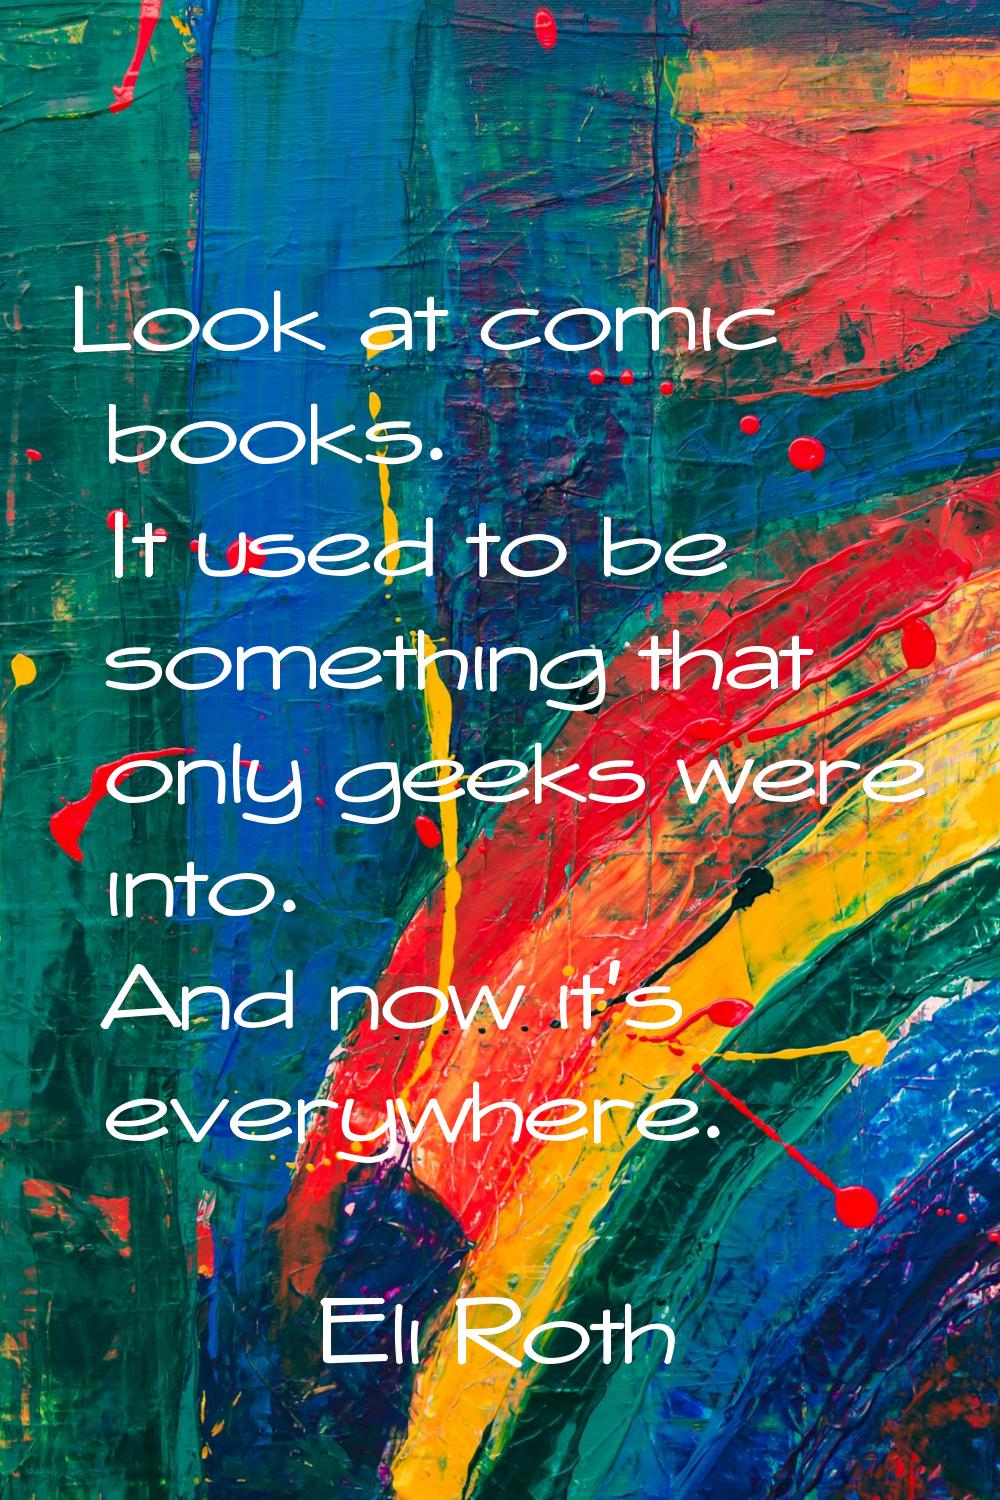 Look at comic books. It used to be something that only geeks were into. And now it's everywhere.